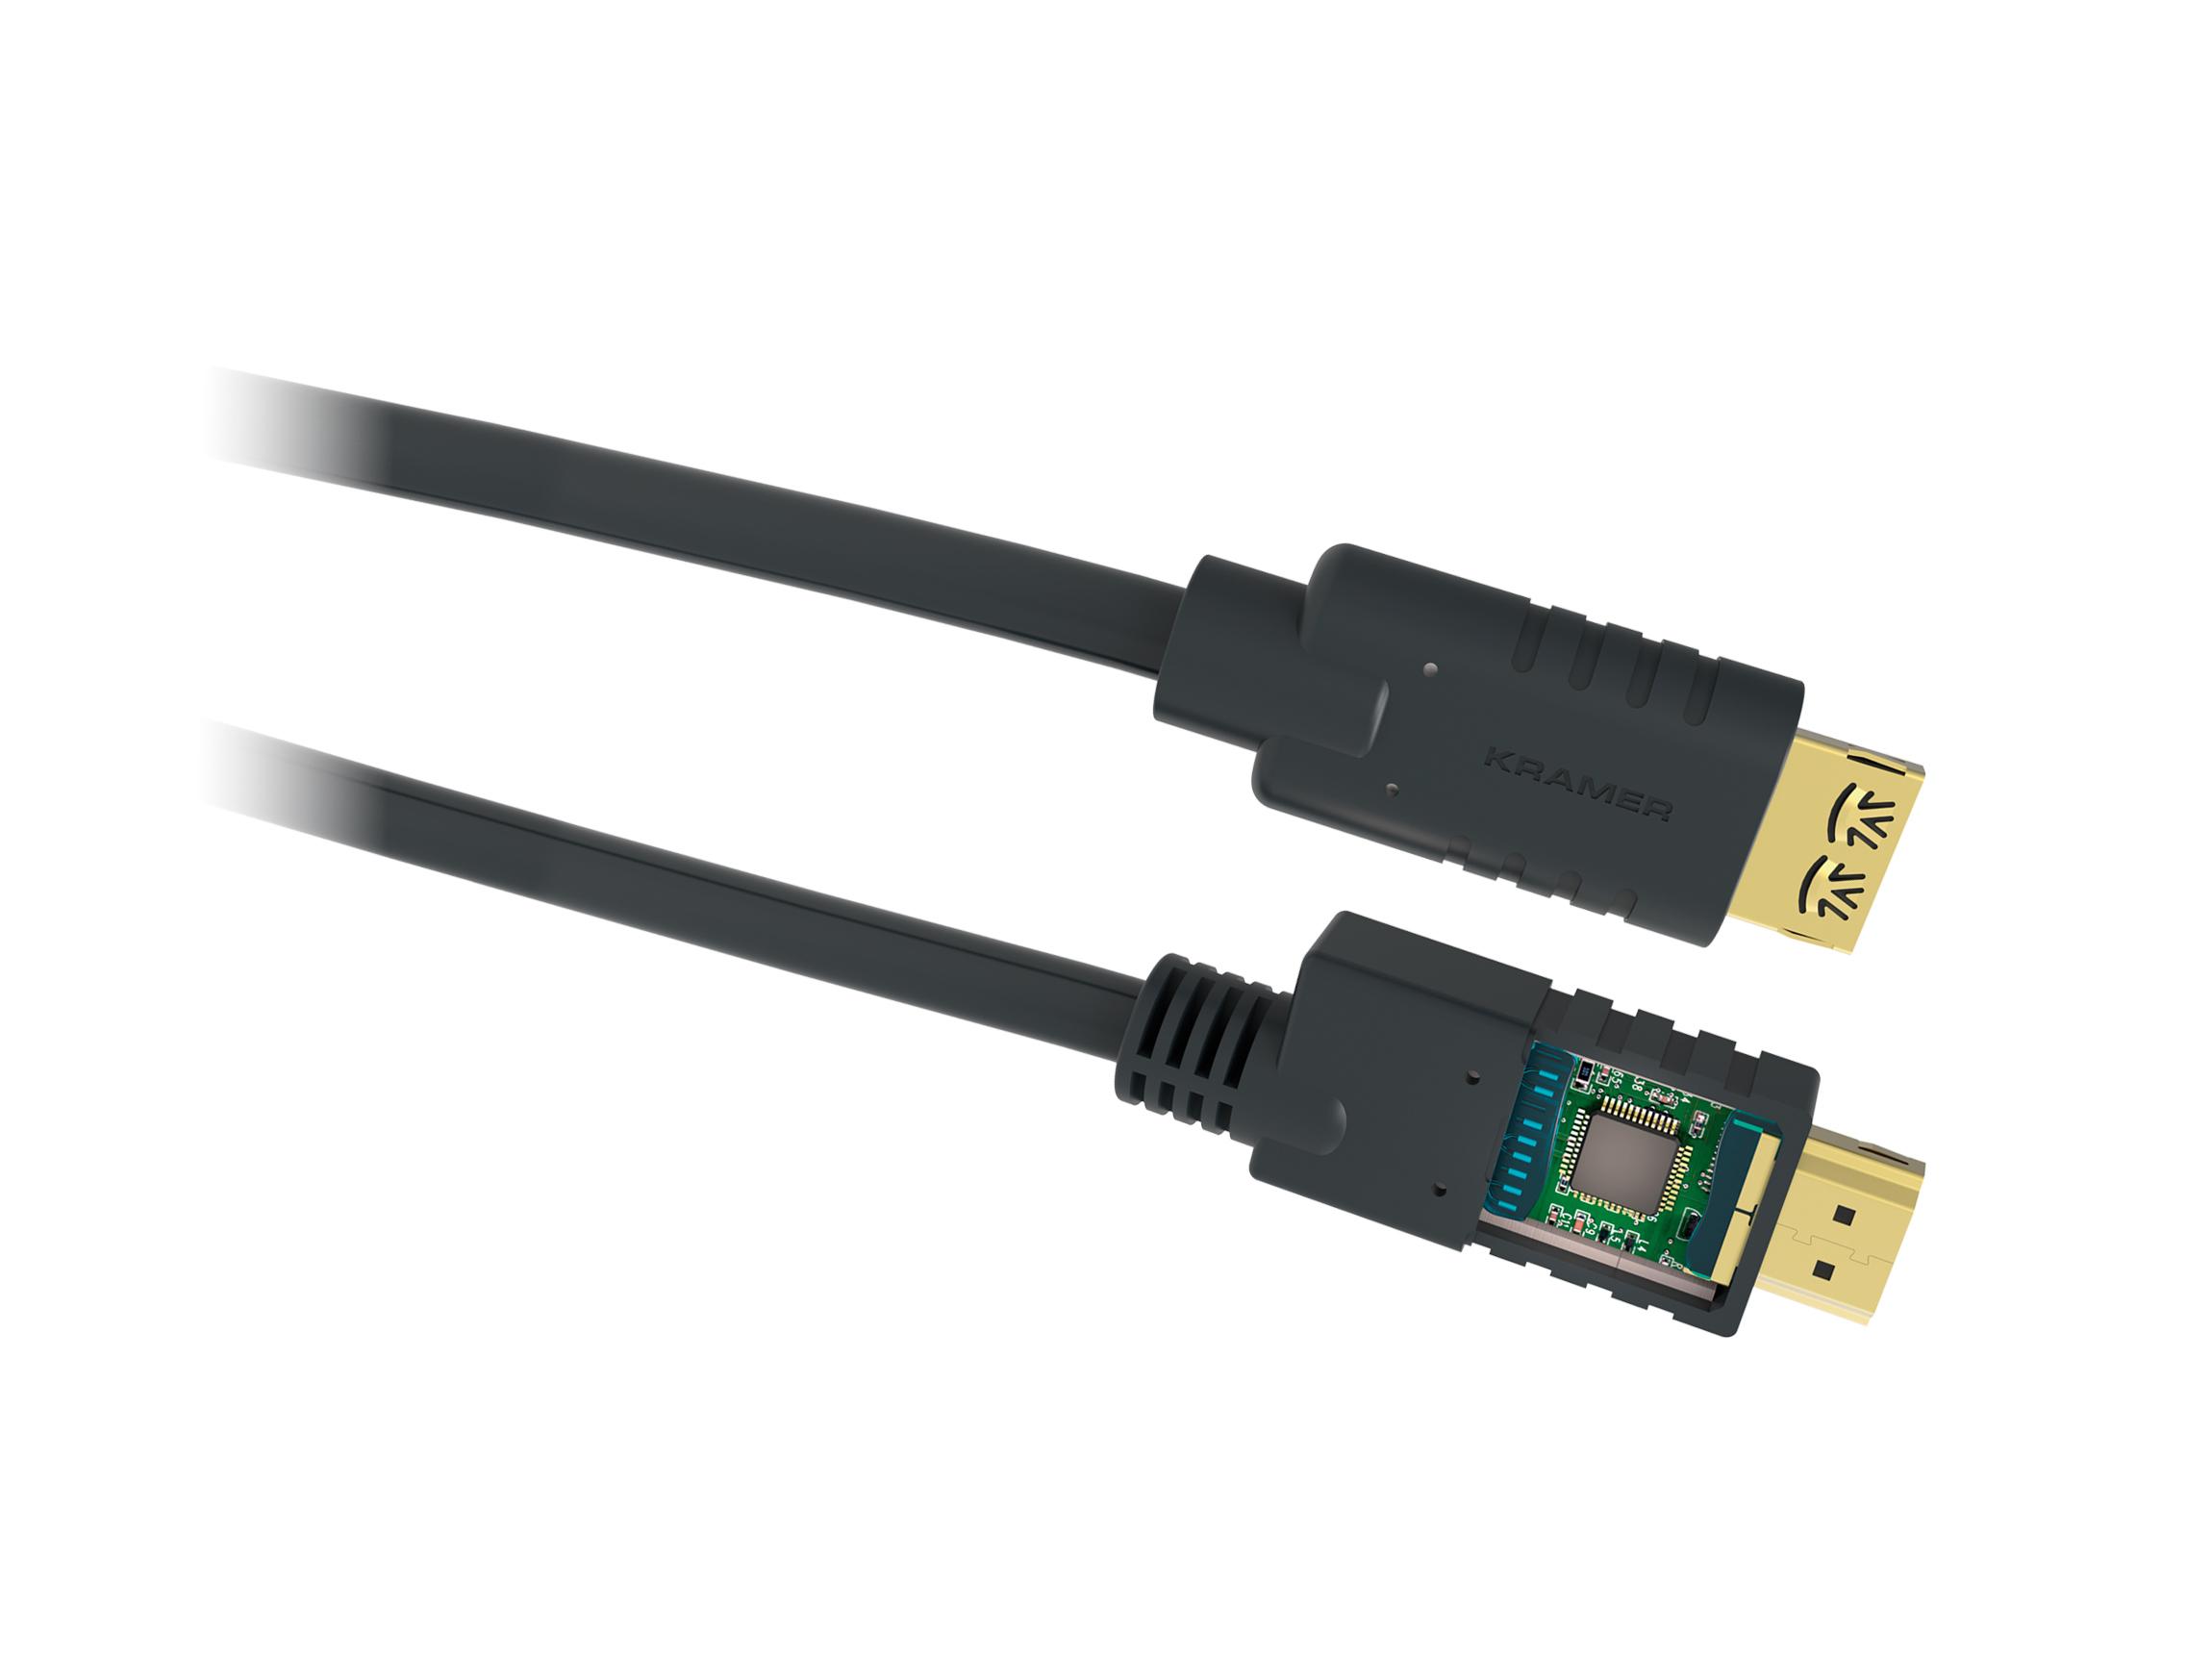 CA-HM-25 Active High Speed HDMI Cable with Ethernet - 25ft by Kramer